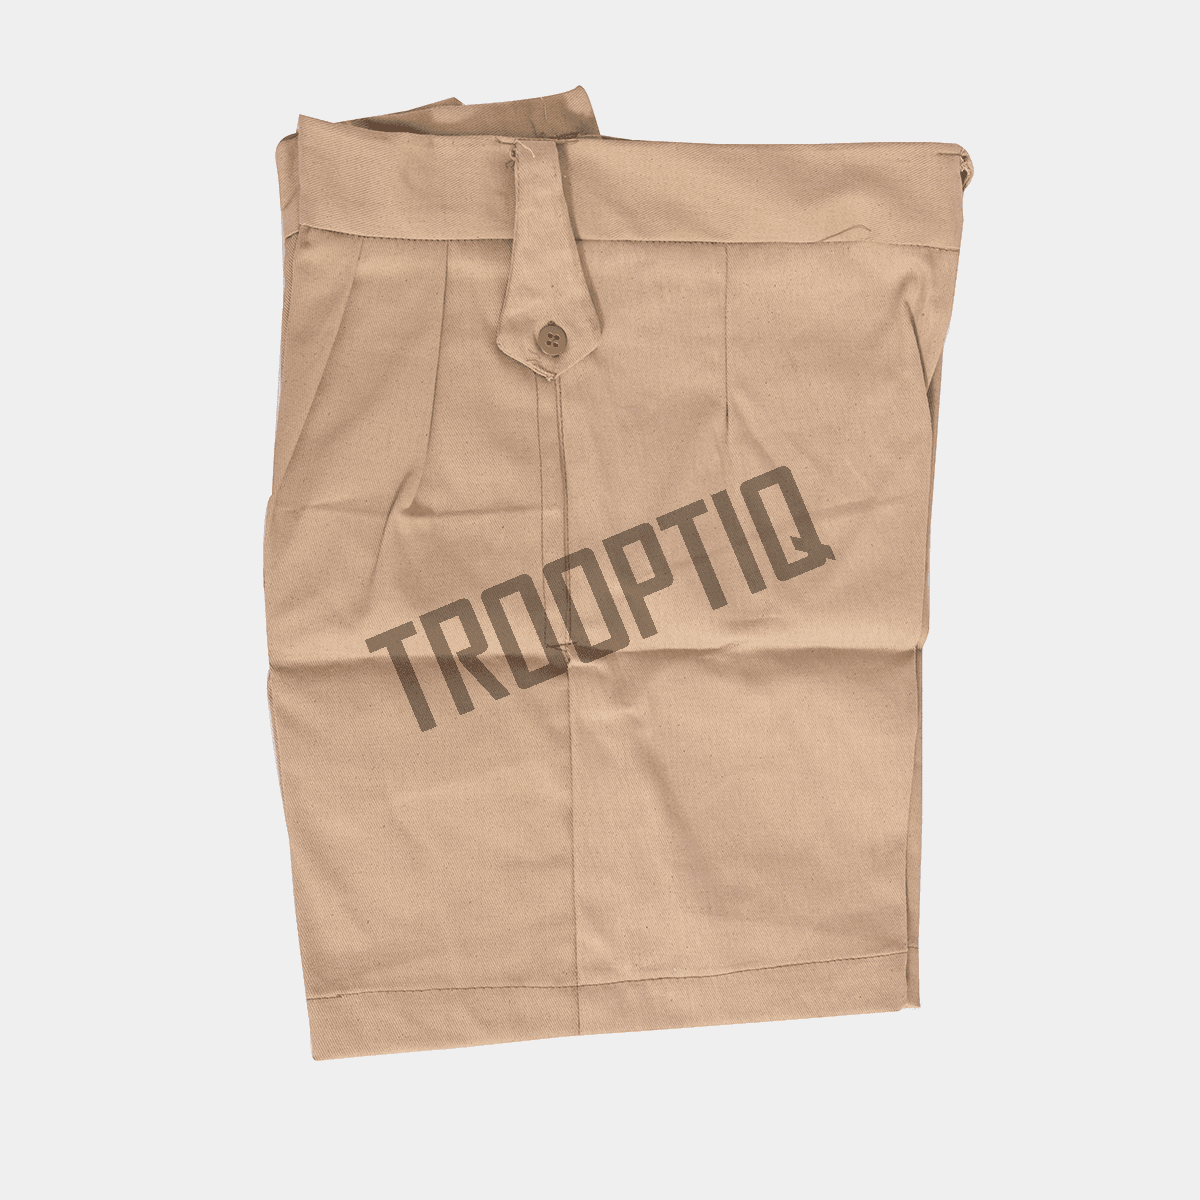 Cotton half pant for Paramilitary forces - manufacturer in India | Trooptiq